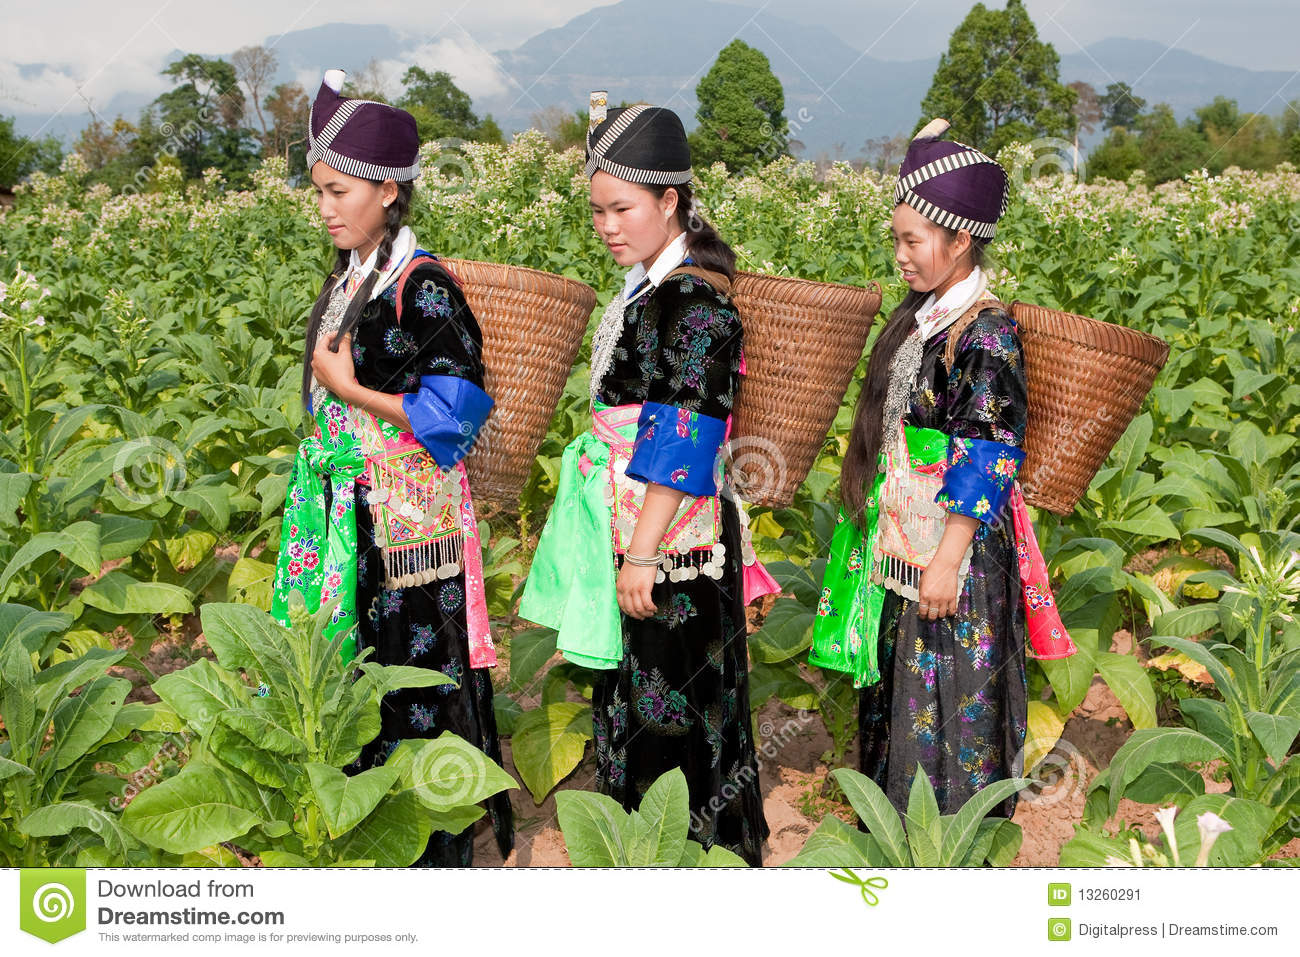 Hmong Of Asia Harvest Tobacco Women In National Costume And Butt In